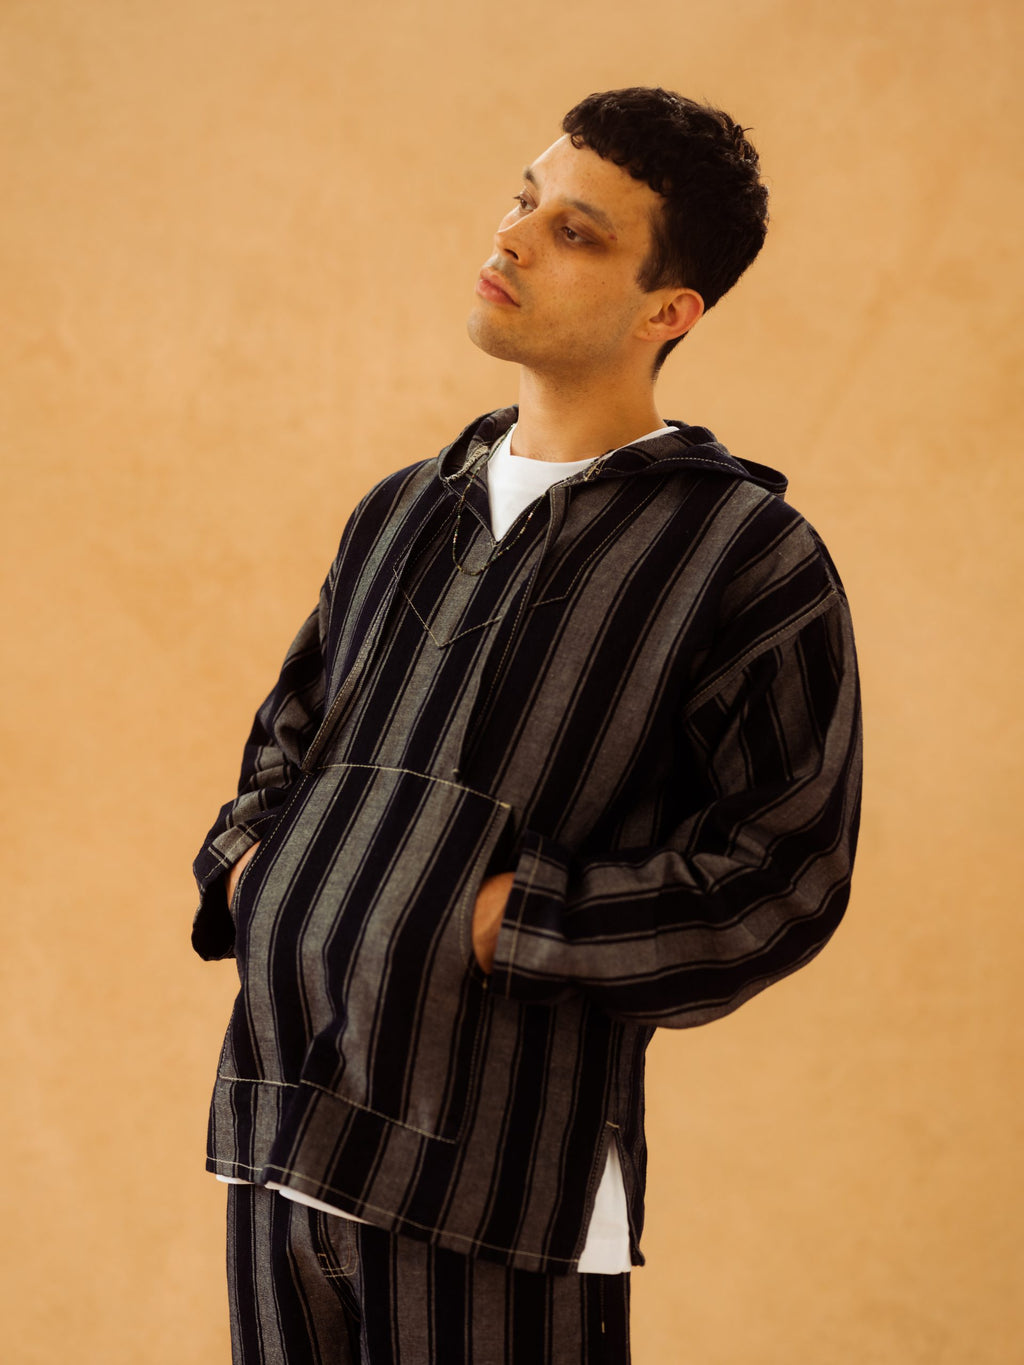 Japanese Woven Striped Hoody